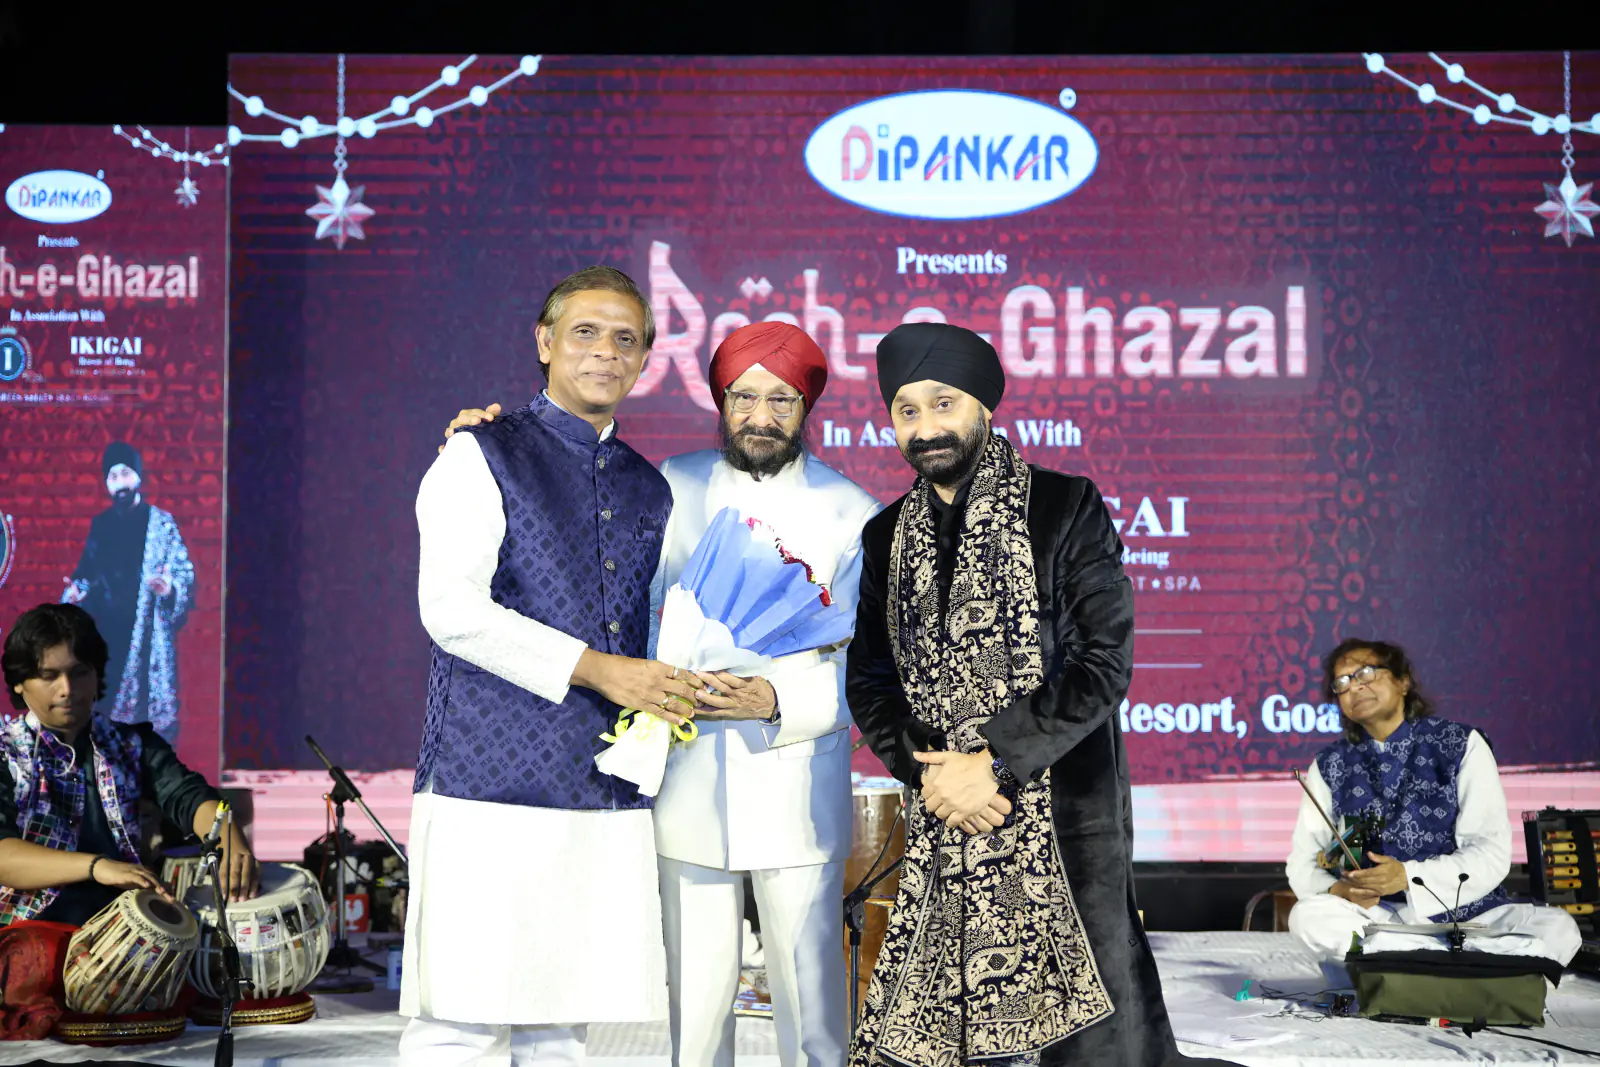 Dr. Suryaji Kamble Creates a Magical New Year's Eve Experience with 'Rooh-e-Ghazal' featuring Jaswinder Singh